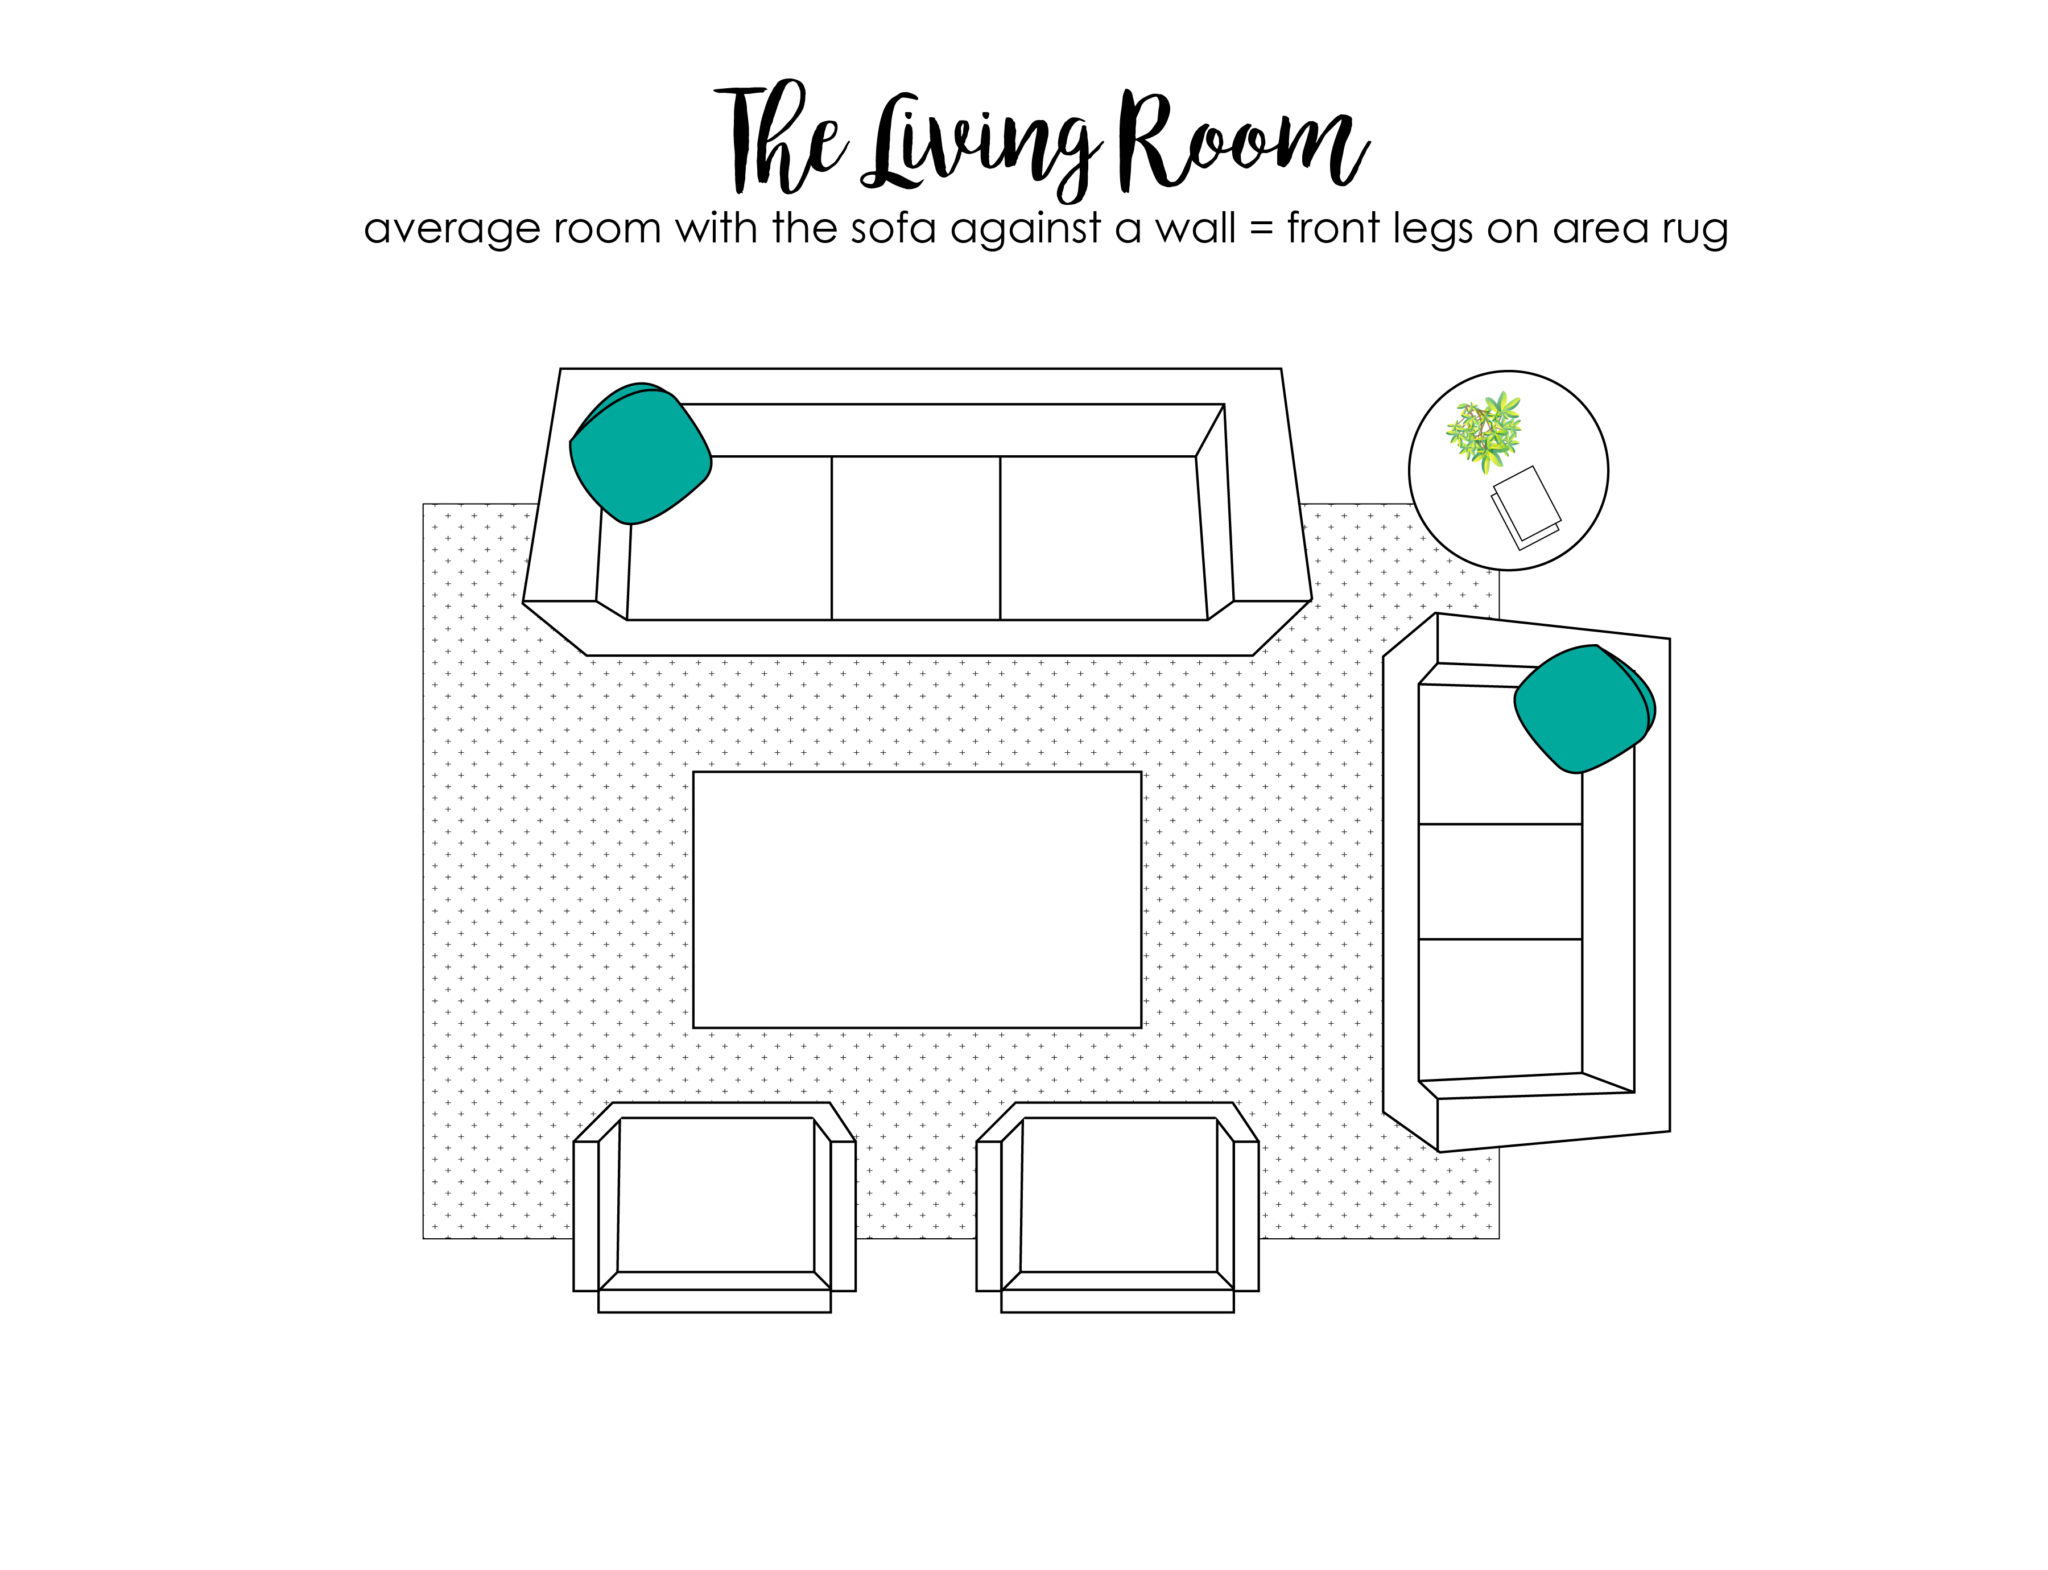 drawing on medium area rug with living room arrangement